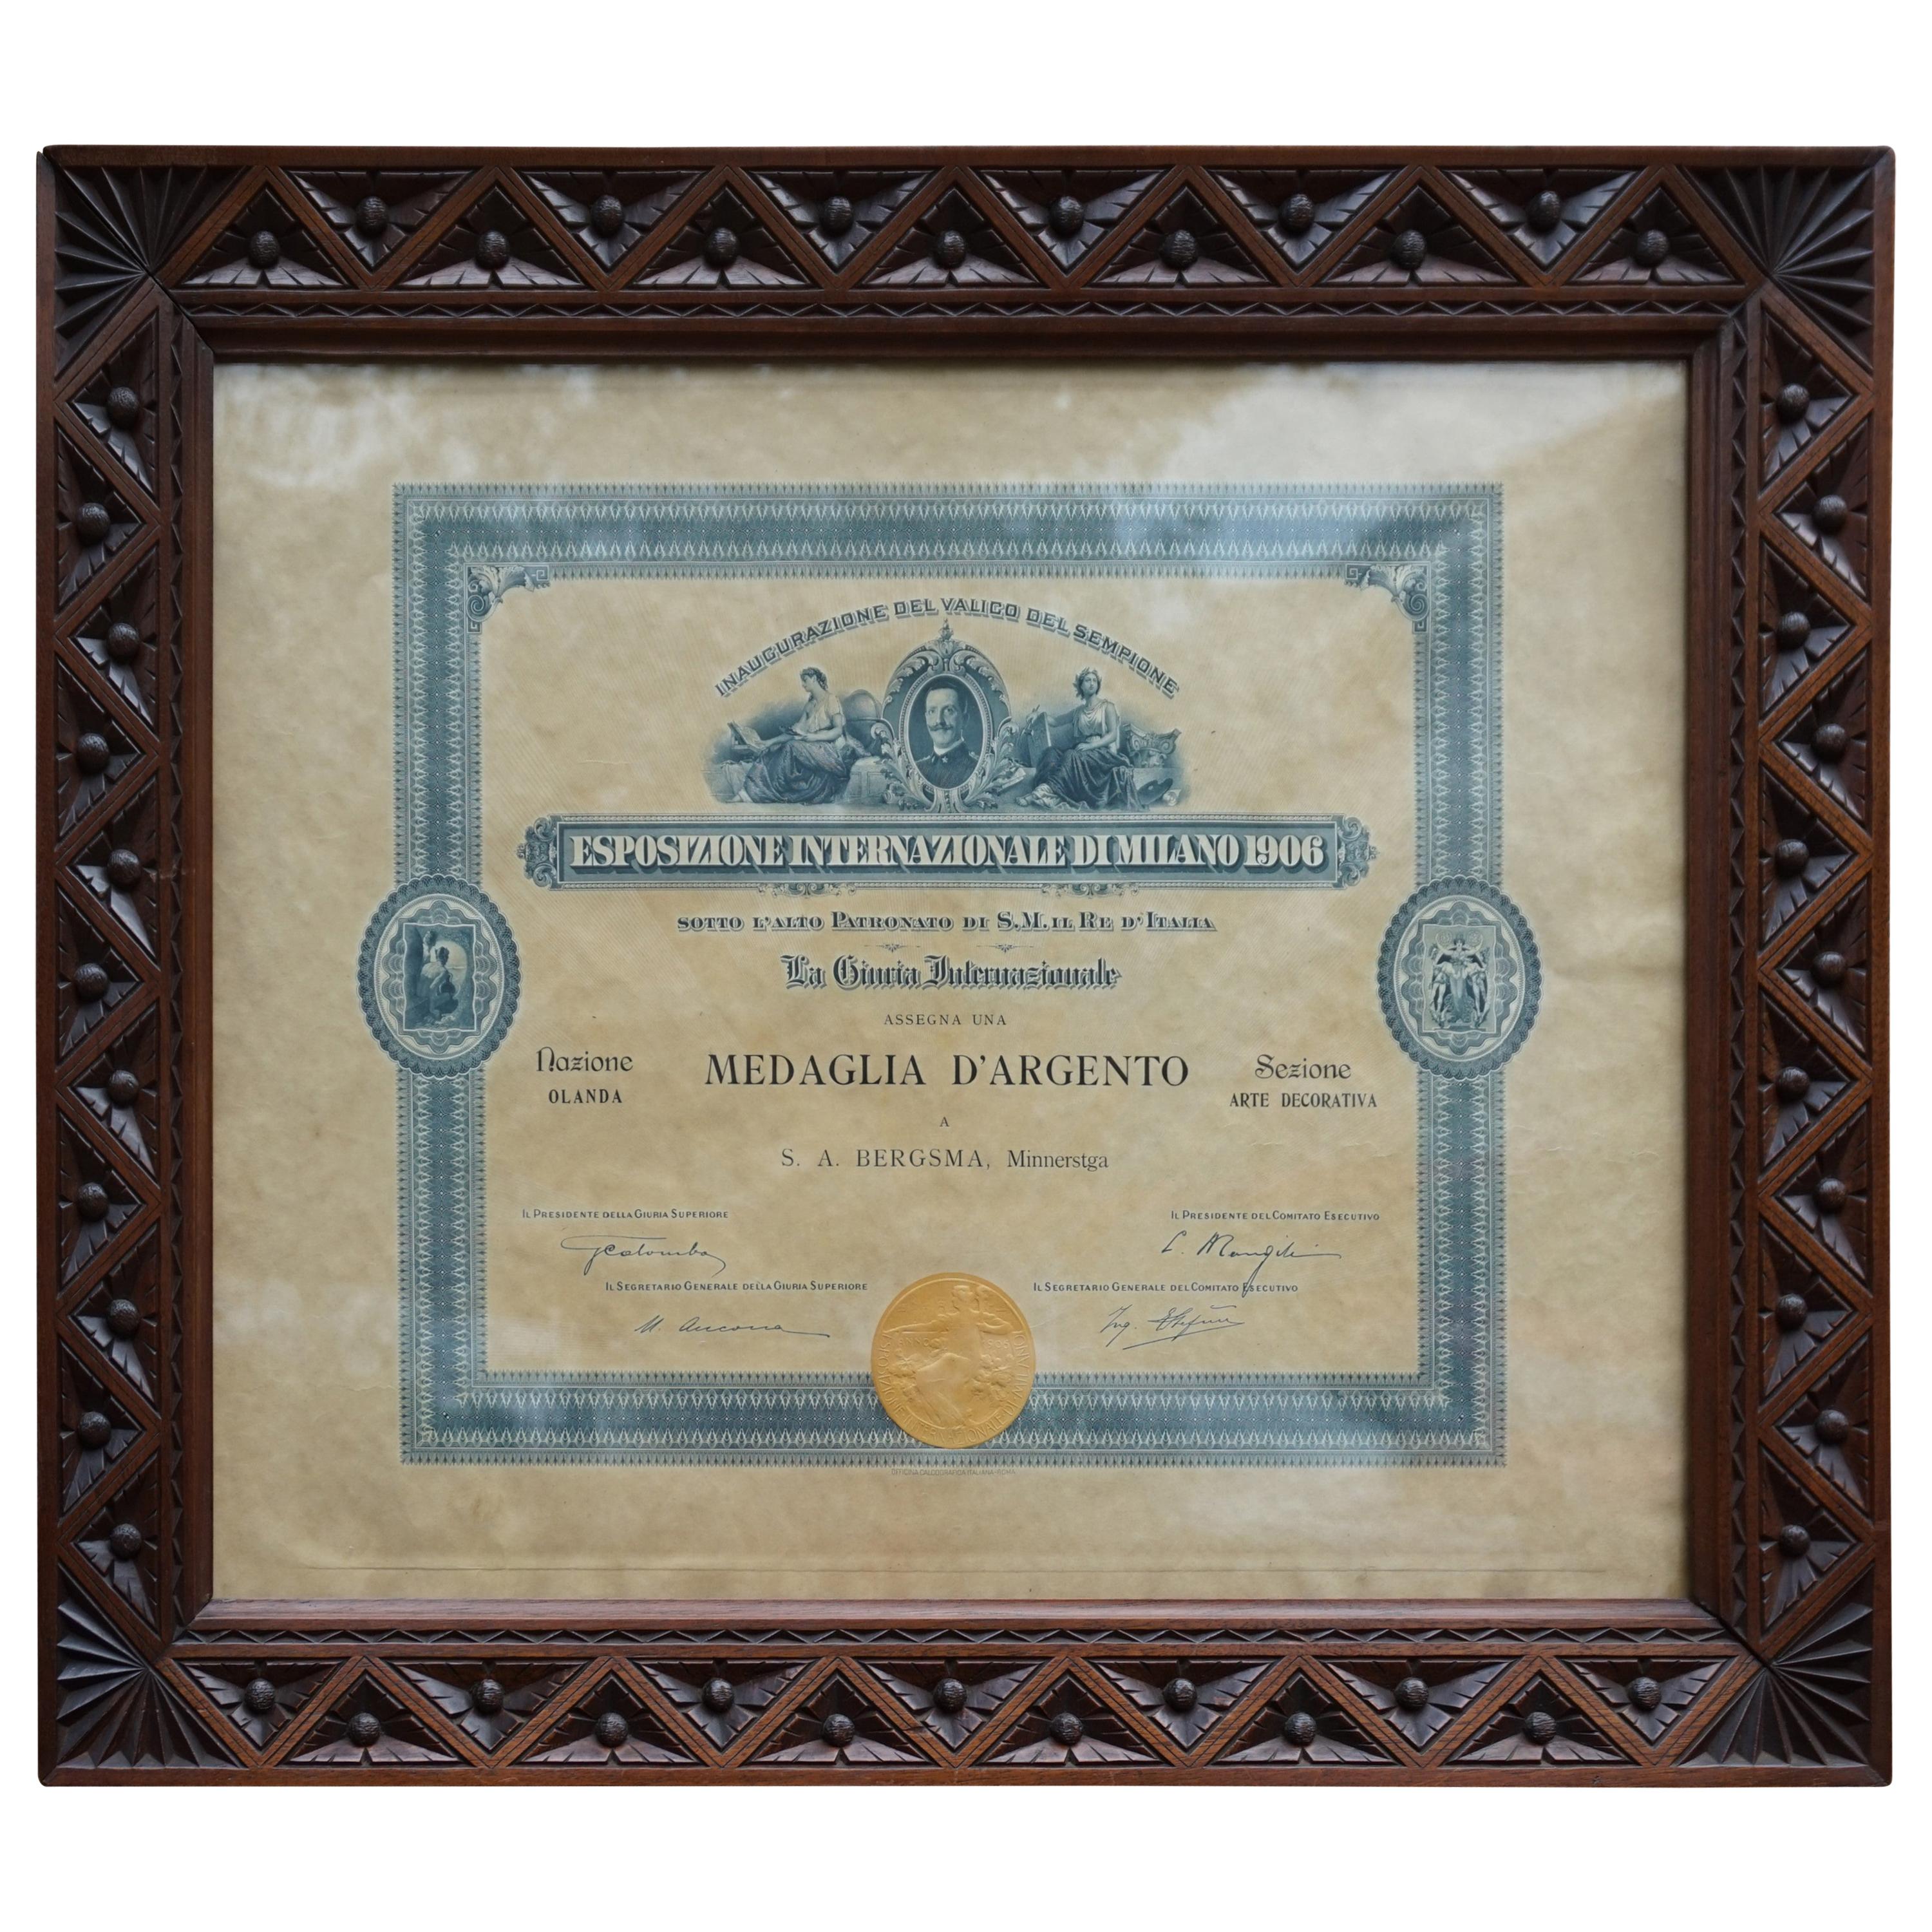 Silver Medal Document of World Exhibition in Milan 1906 in Arts and Crafts Frame